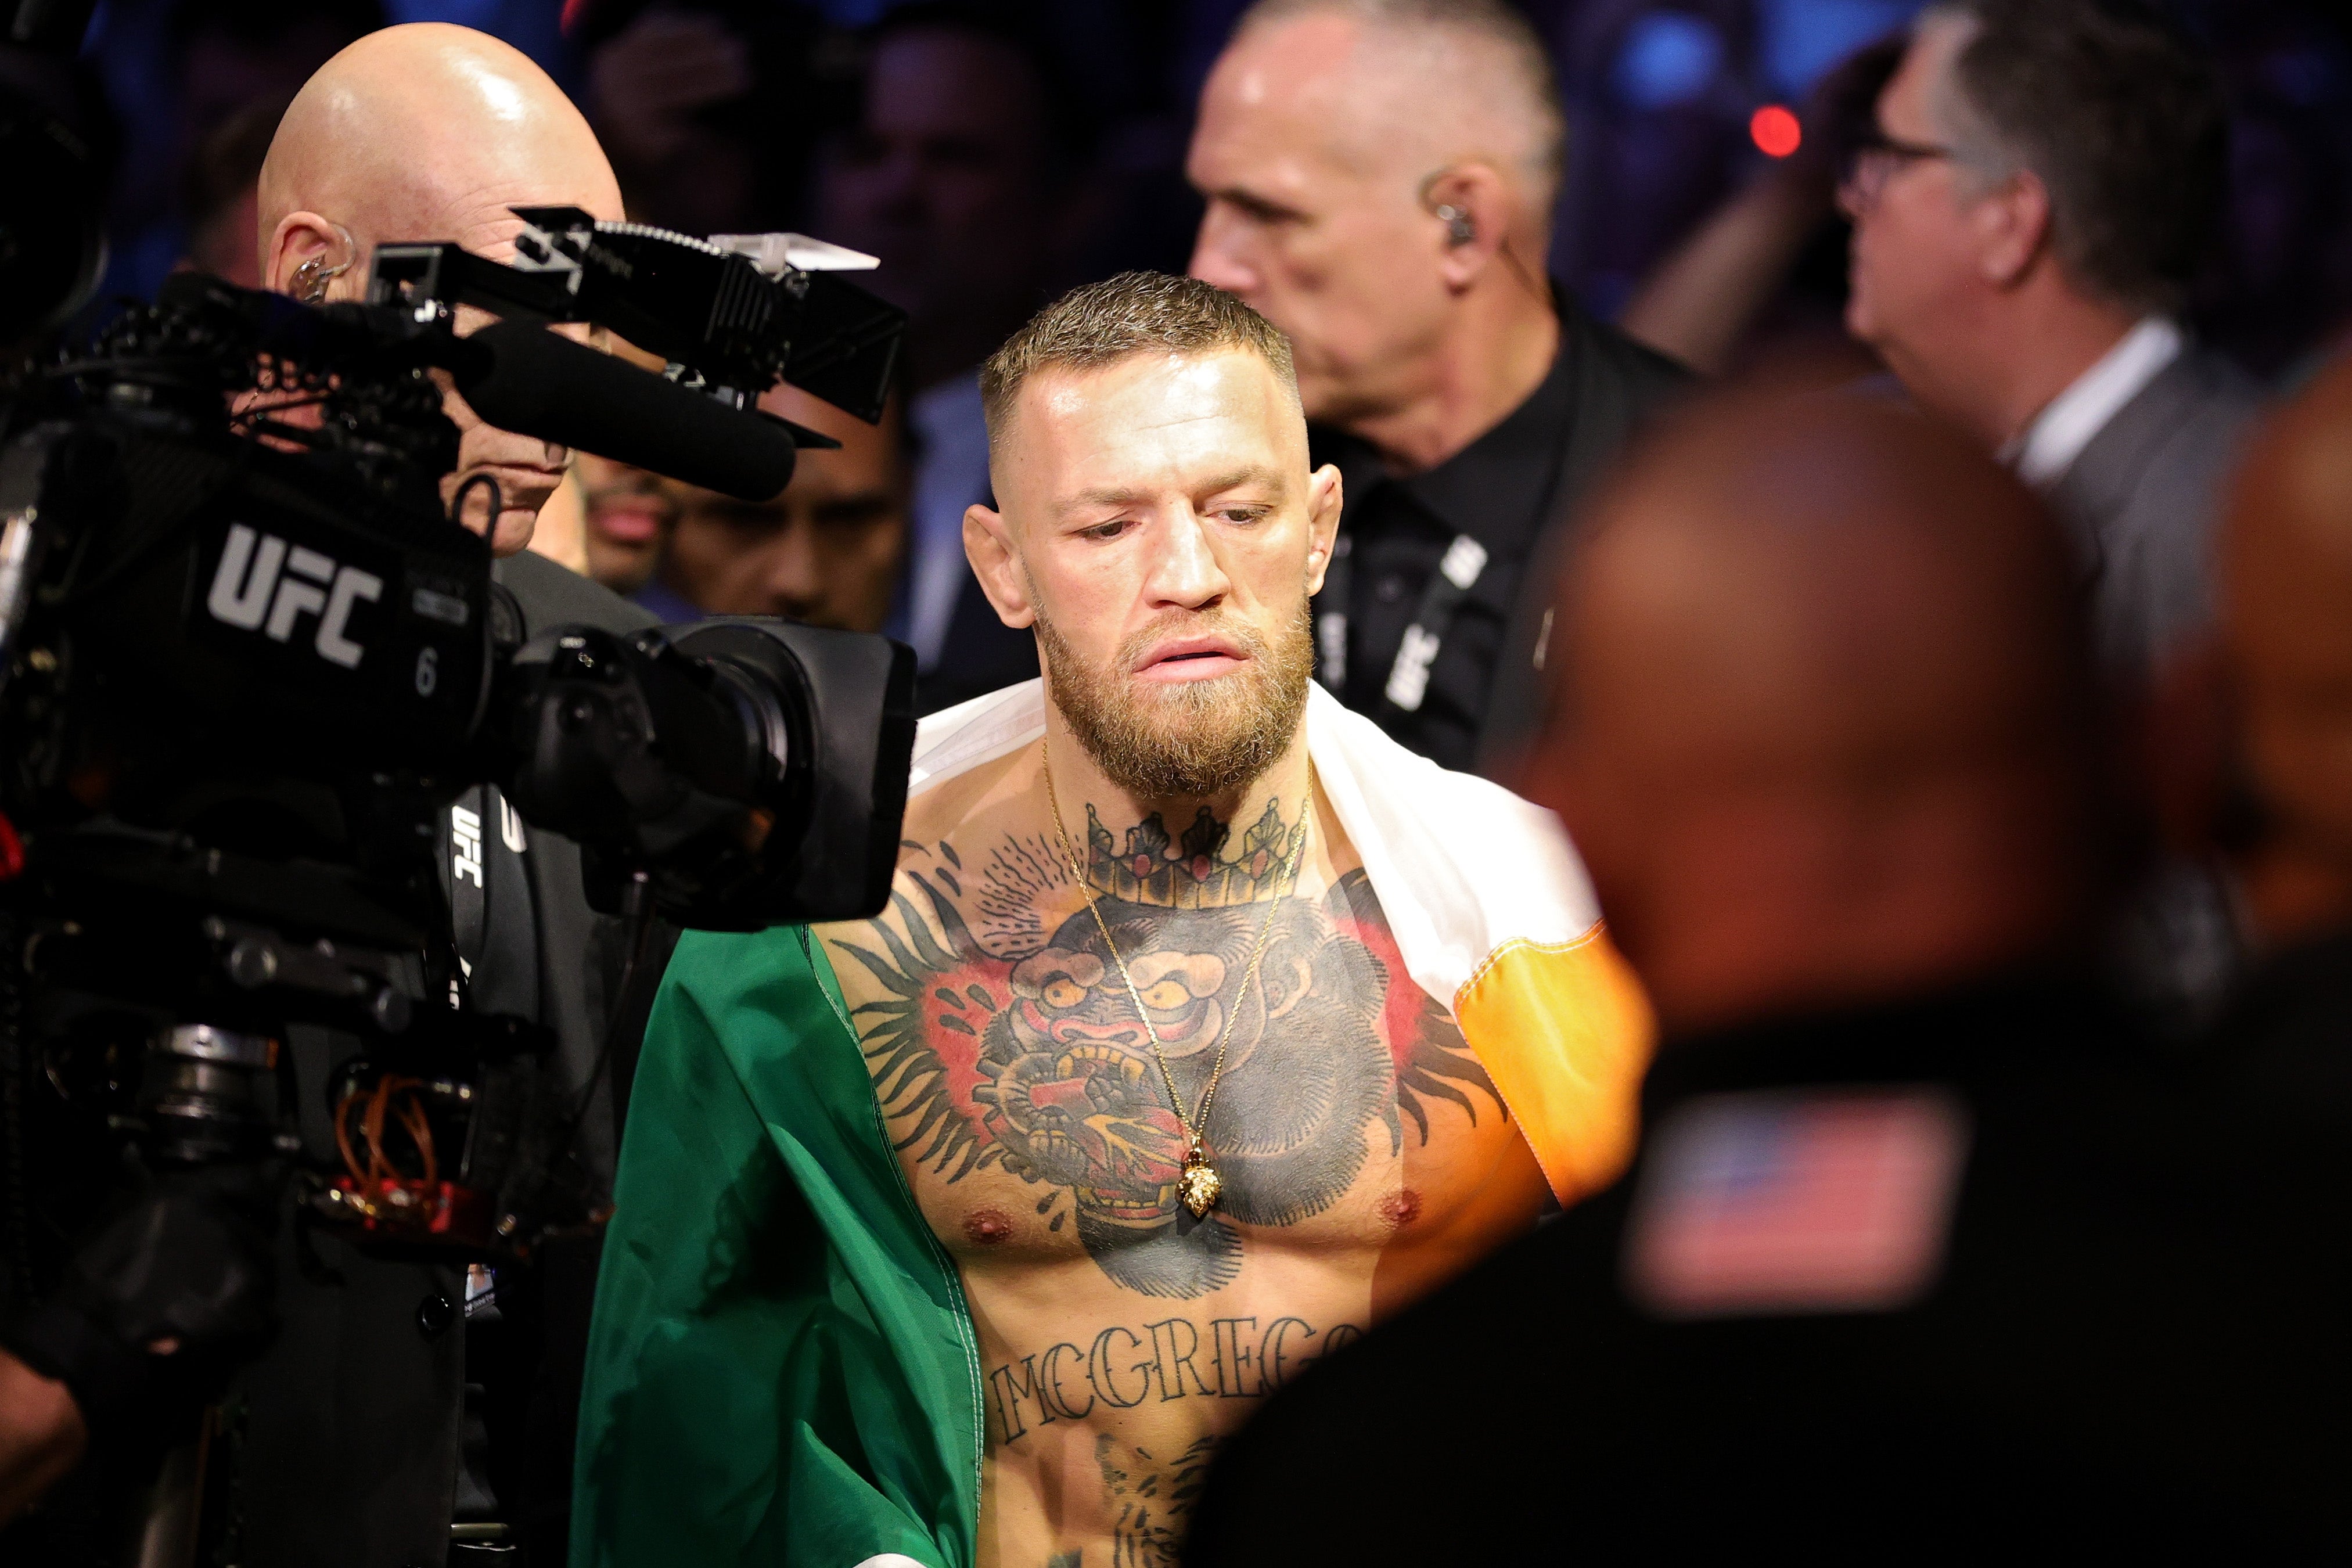 Conor McGregor has suffered consecutive defeats in the UFC